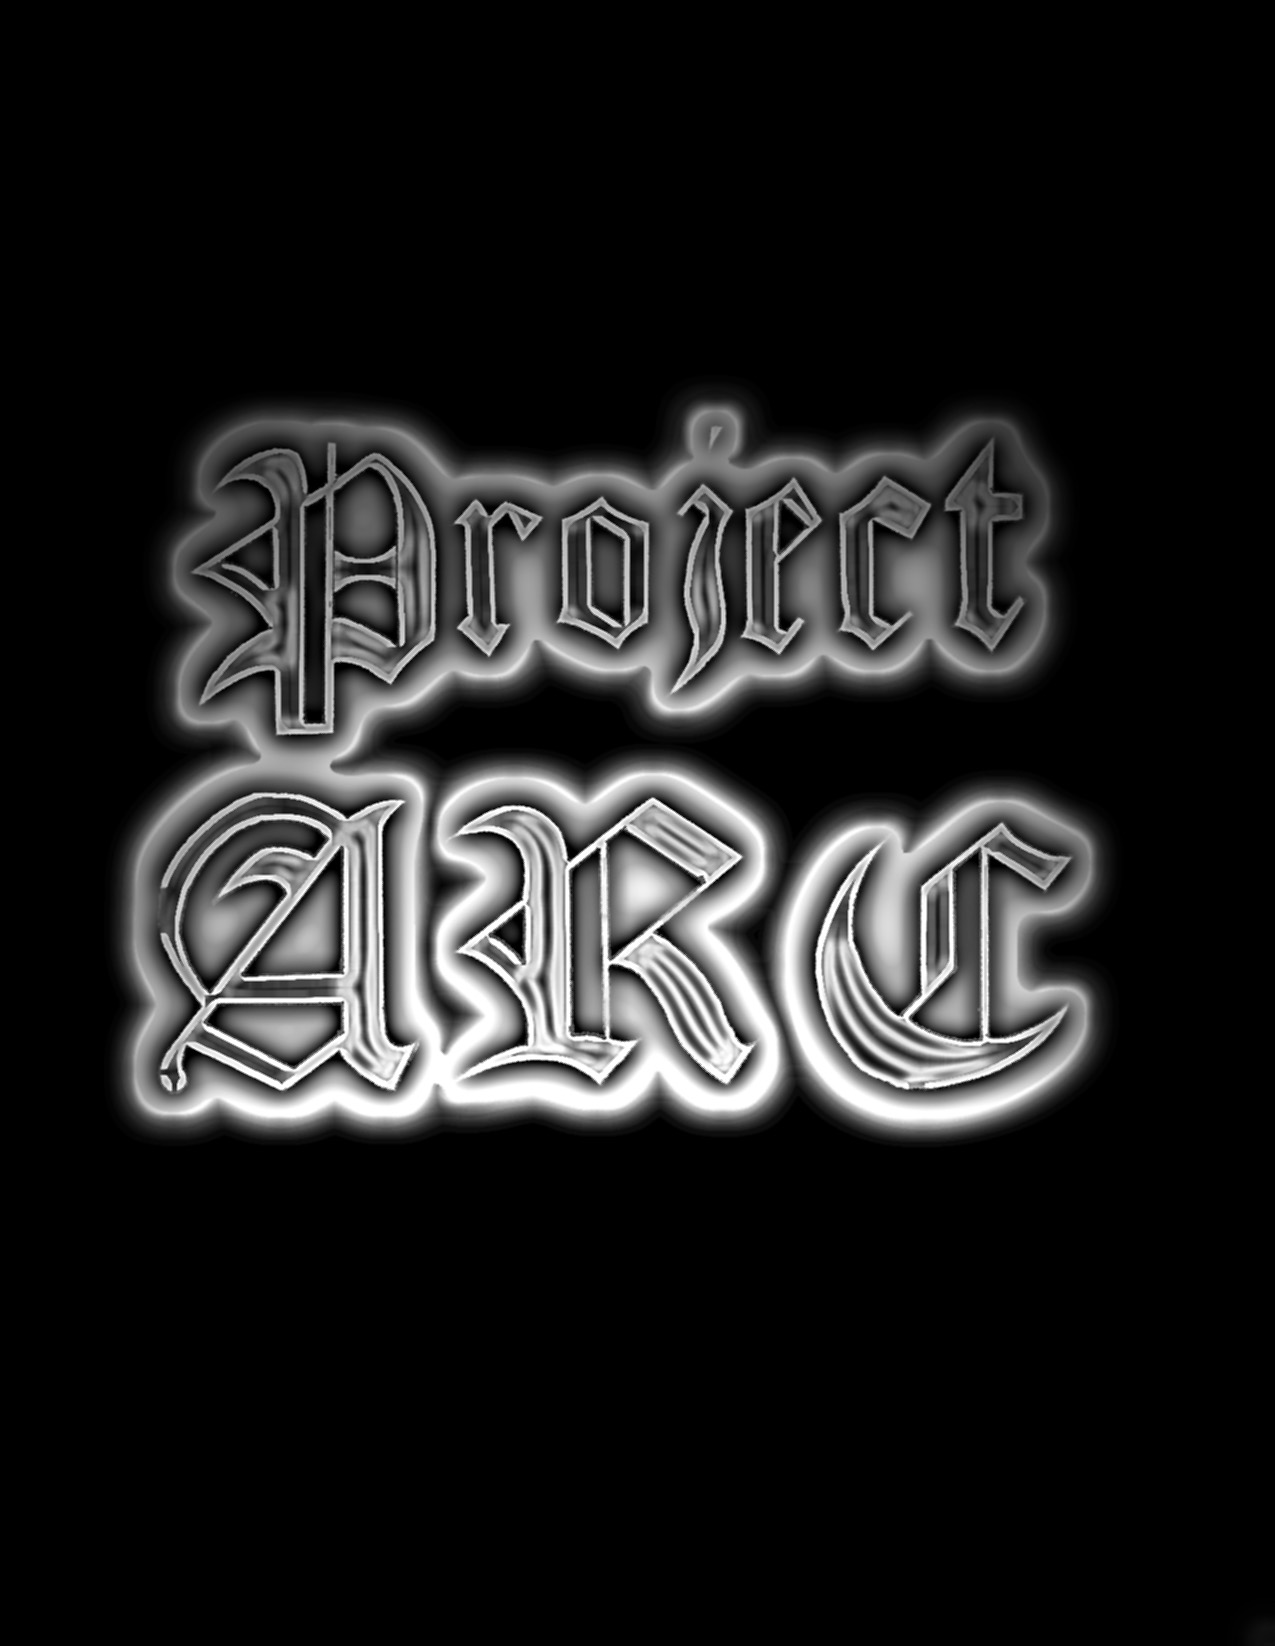 Project A.R.C. by Sephiroth_Reborn